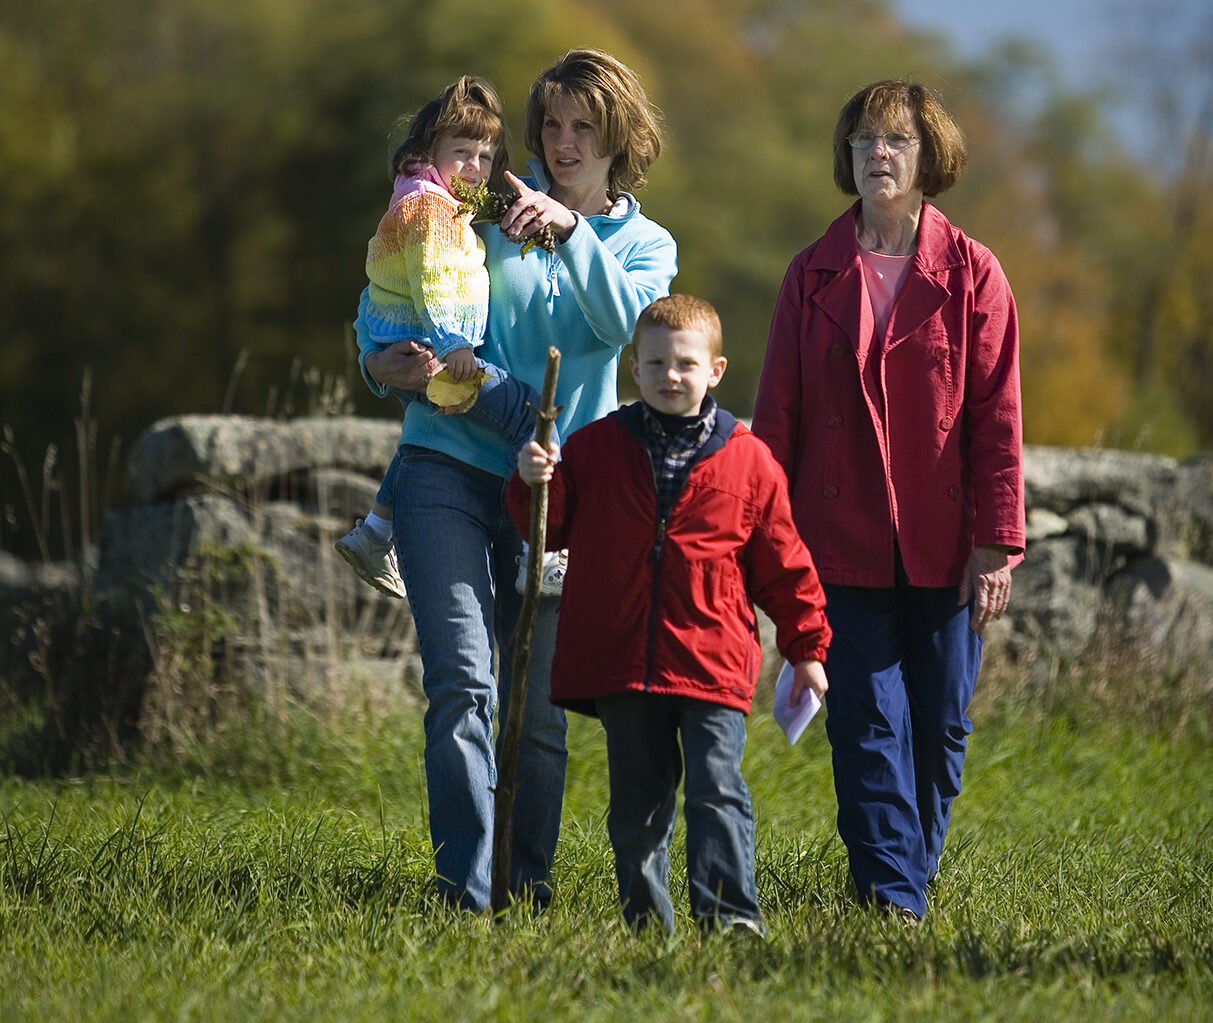 Two women hiking in a green field with two children during the day with fall foliage in the background